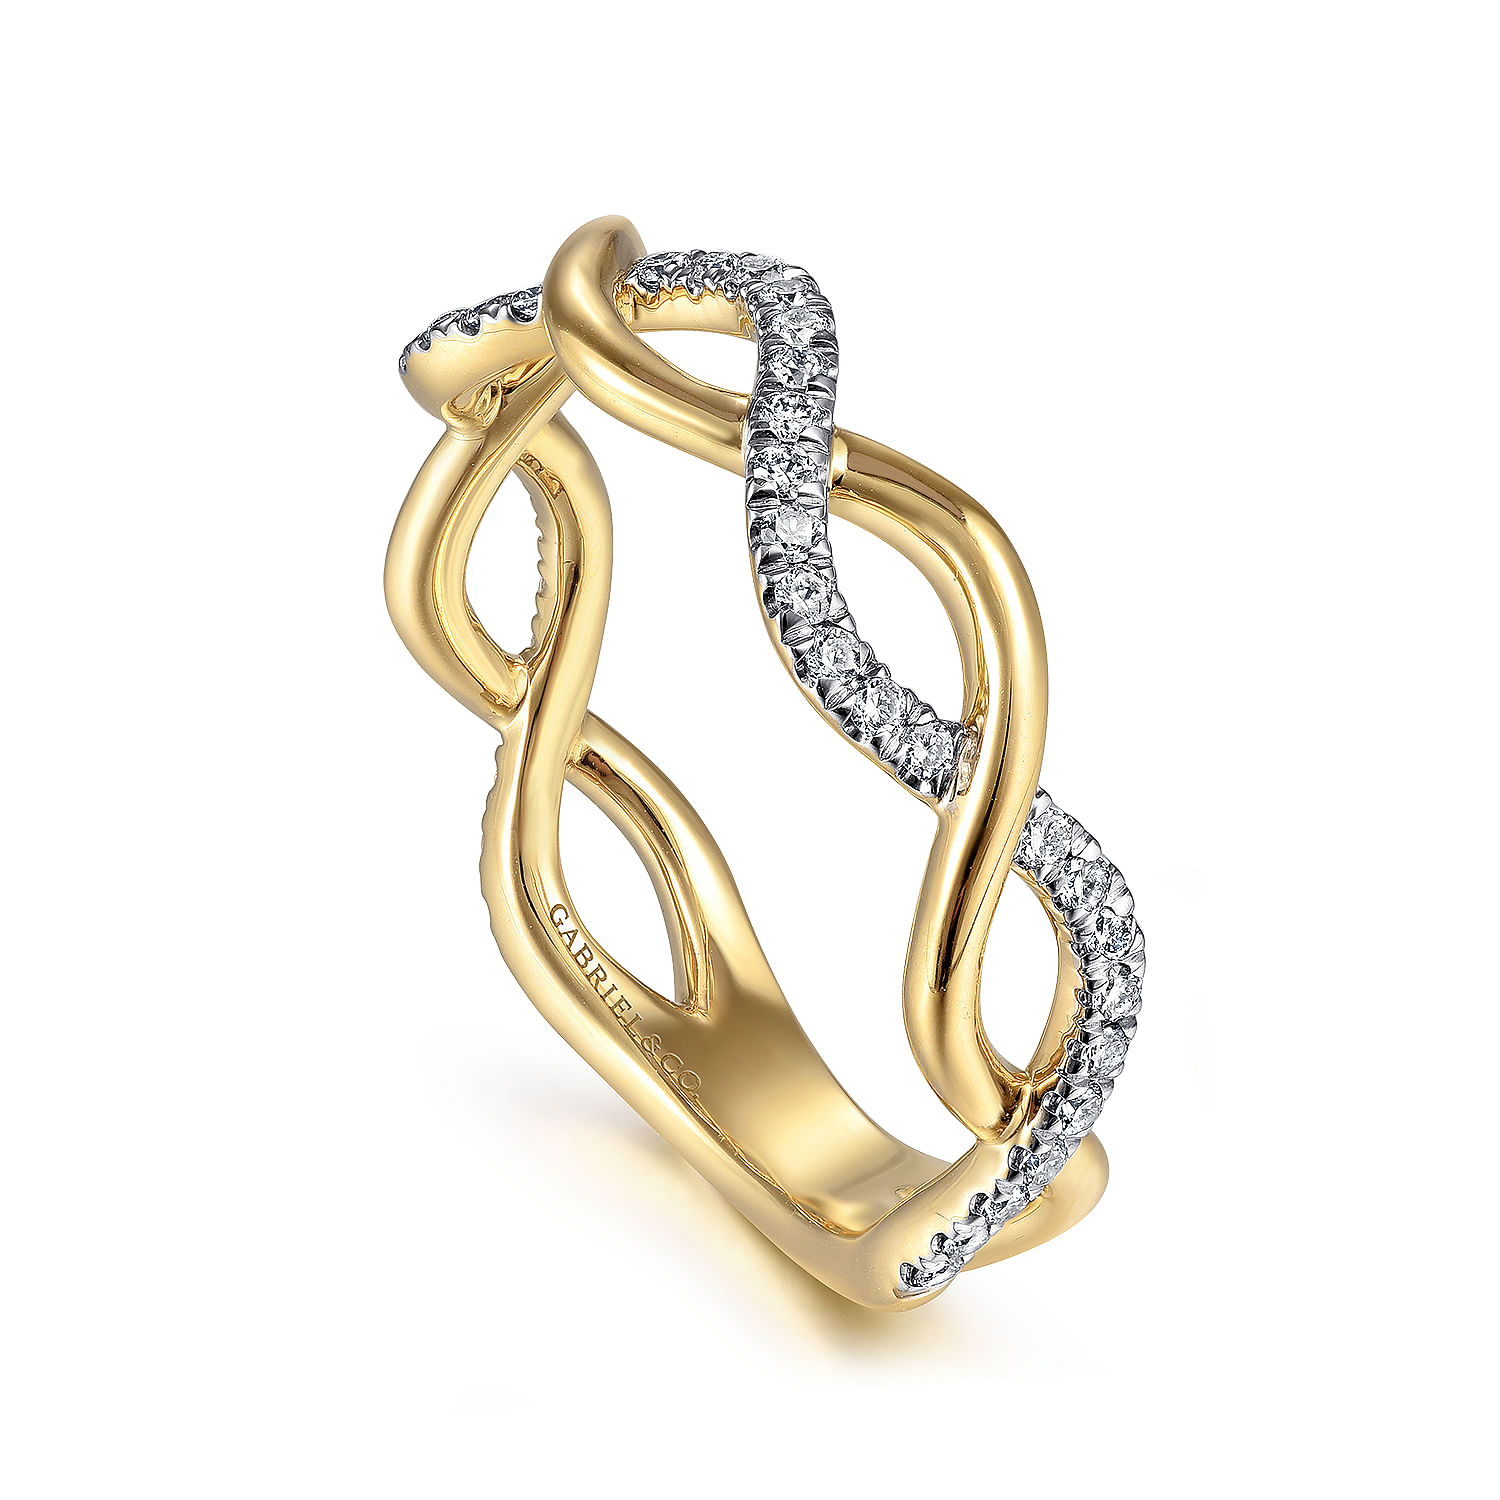 14K Yellow Gold Twisted Diamond Stackable Ring - 0.2 ct - Shot 3